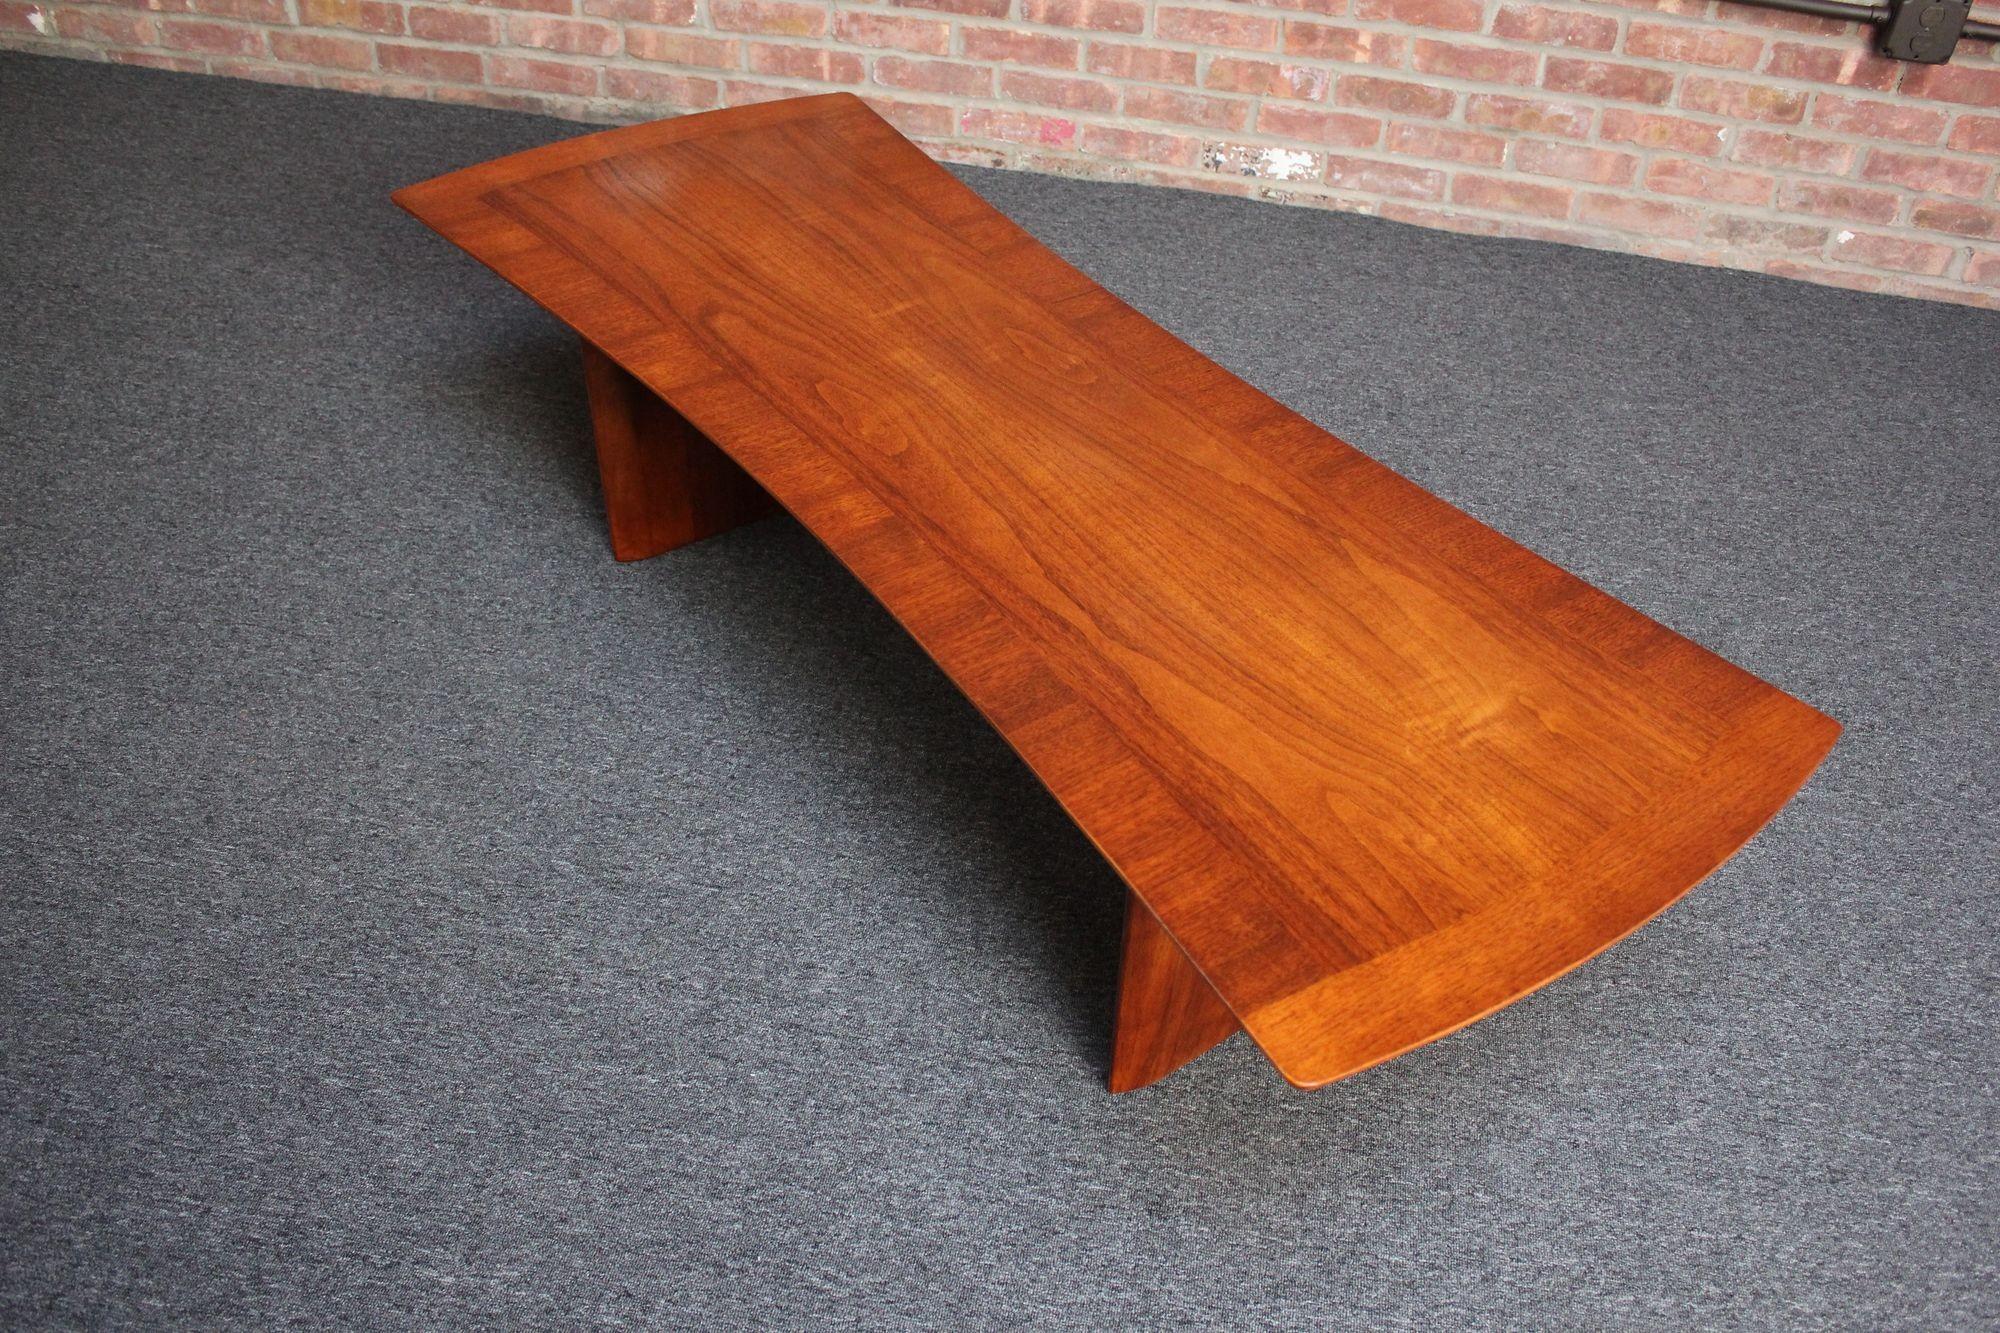 Mid-Century American Modern coffee table designed by T.H. Robsjohn-Gibbings for Widdicomb (ca. 1950s, USA). Composed of two solid walnut plinth bases supporting a 'bowtie' surface. Aesthetically pleasing with its organic form and lustrous walnut